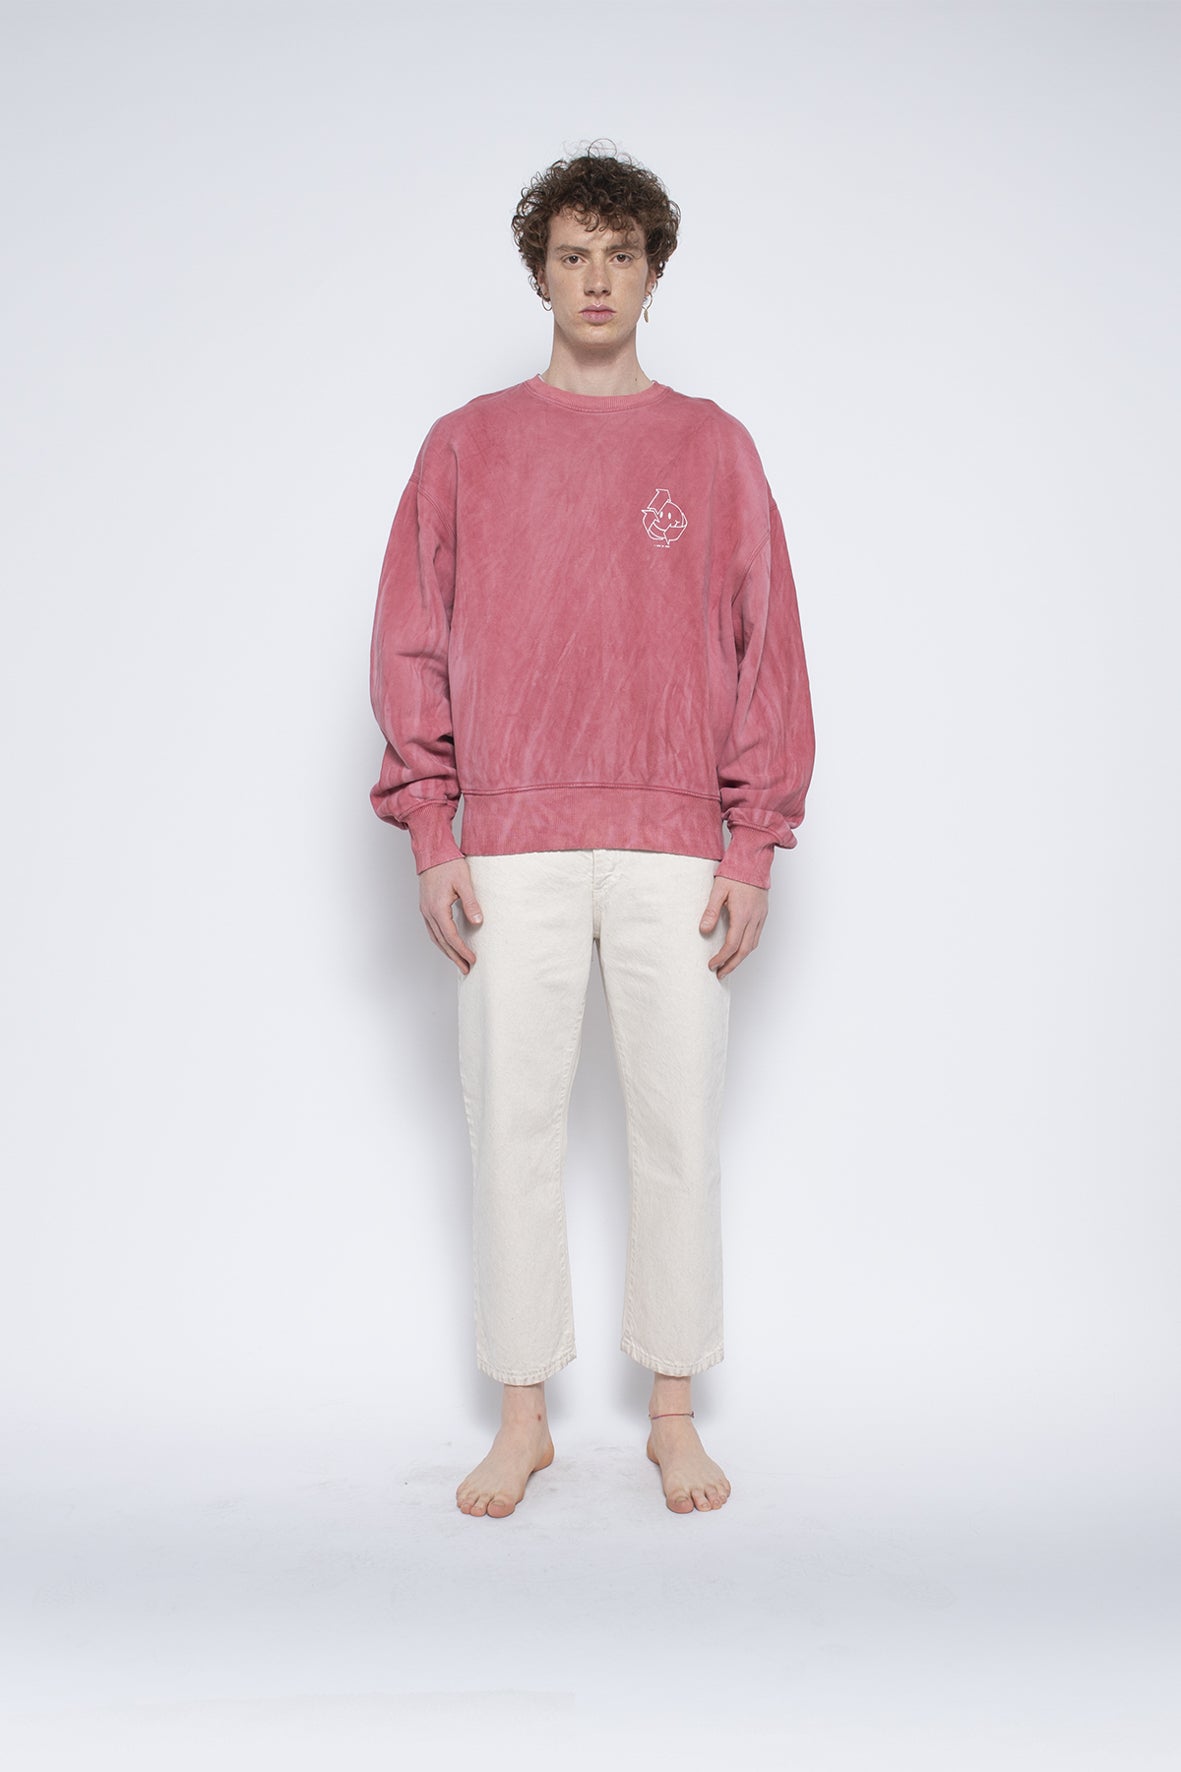 Cuni tie-dye sweater - responsible sourcing